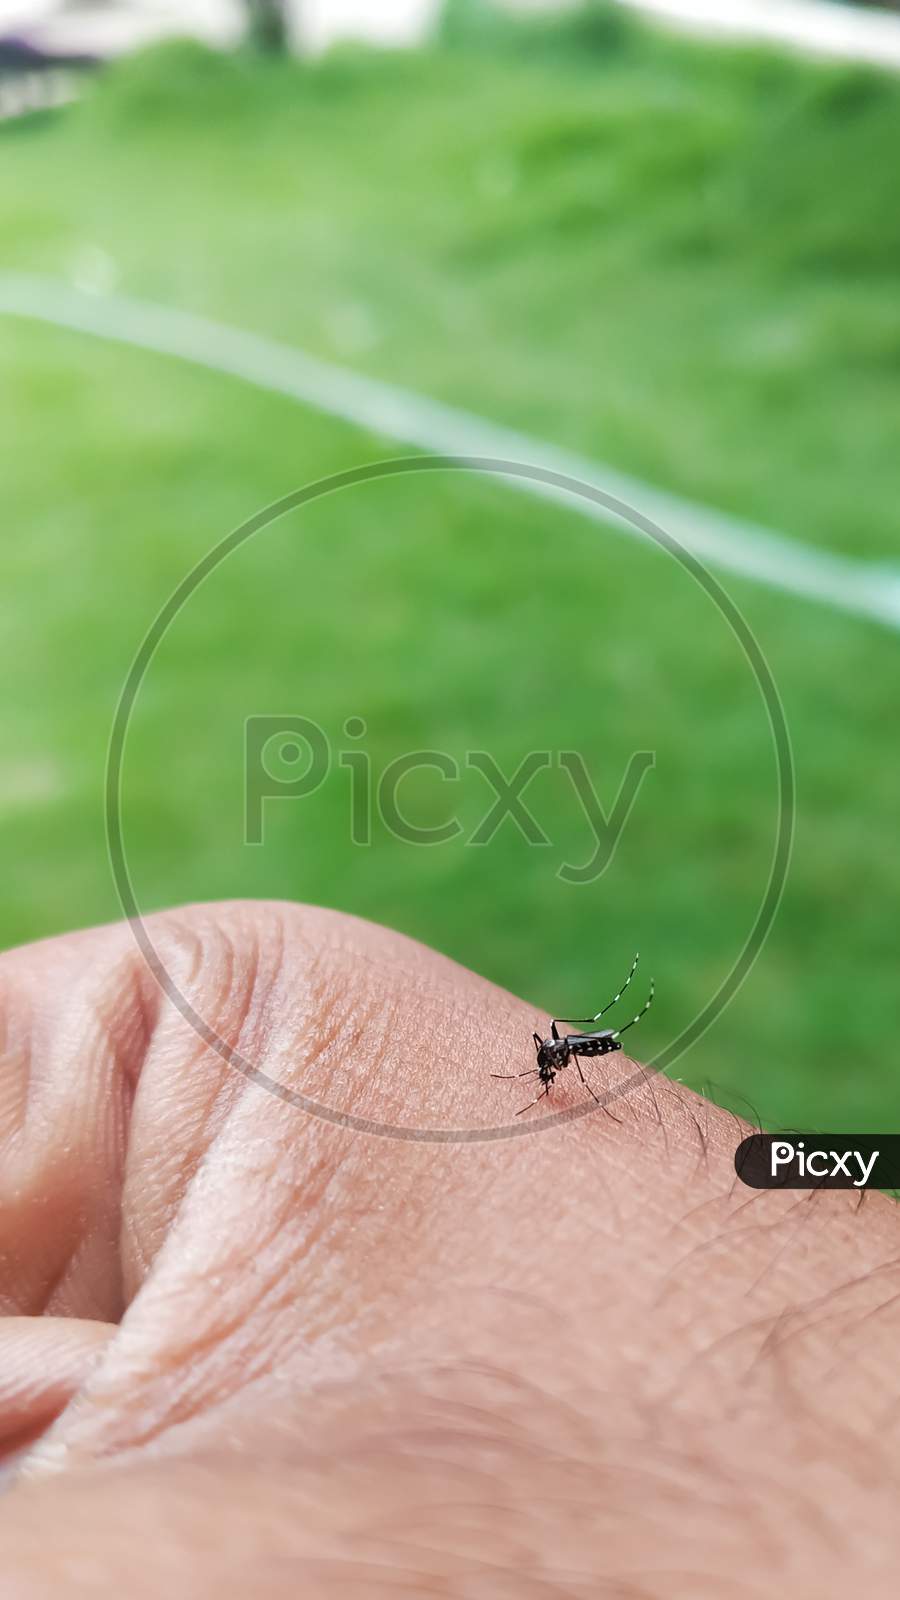 Mosquito on the hand